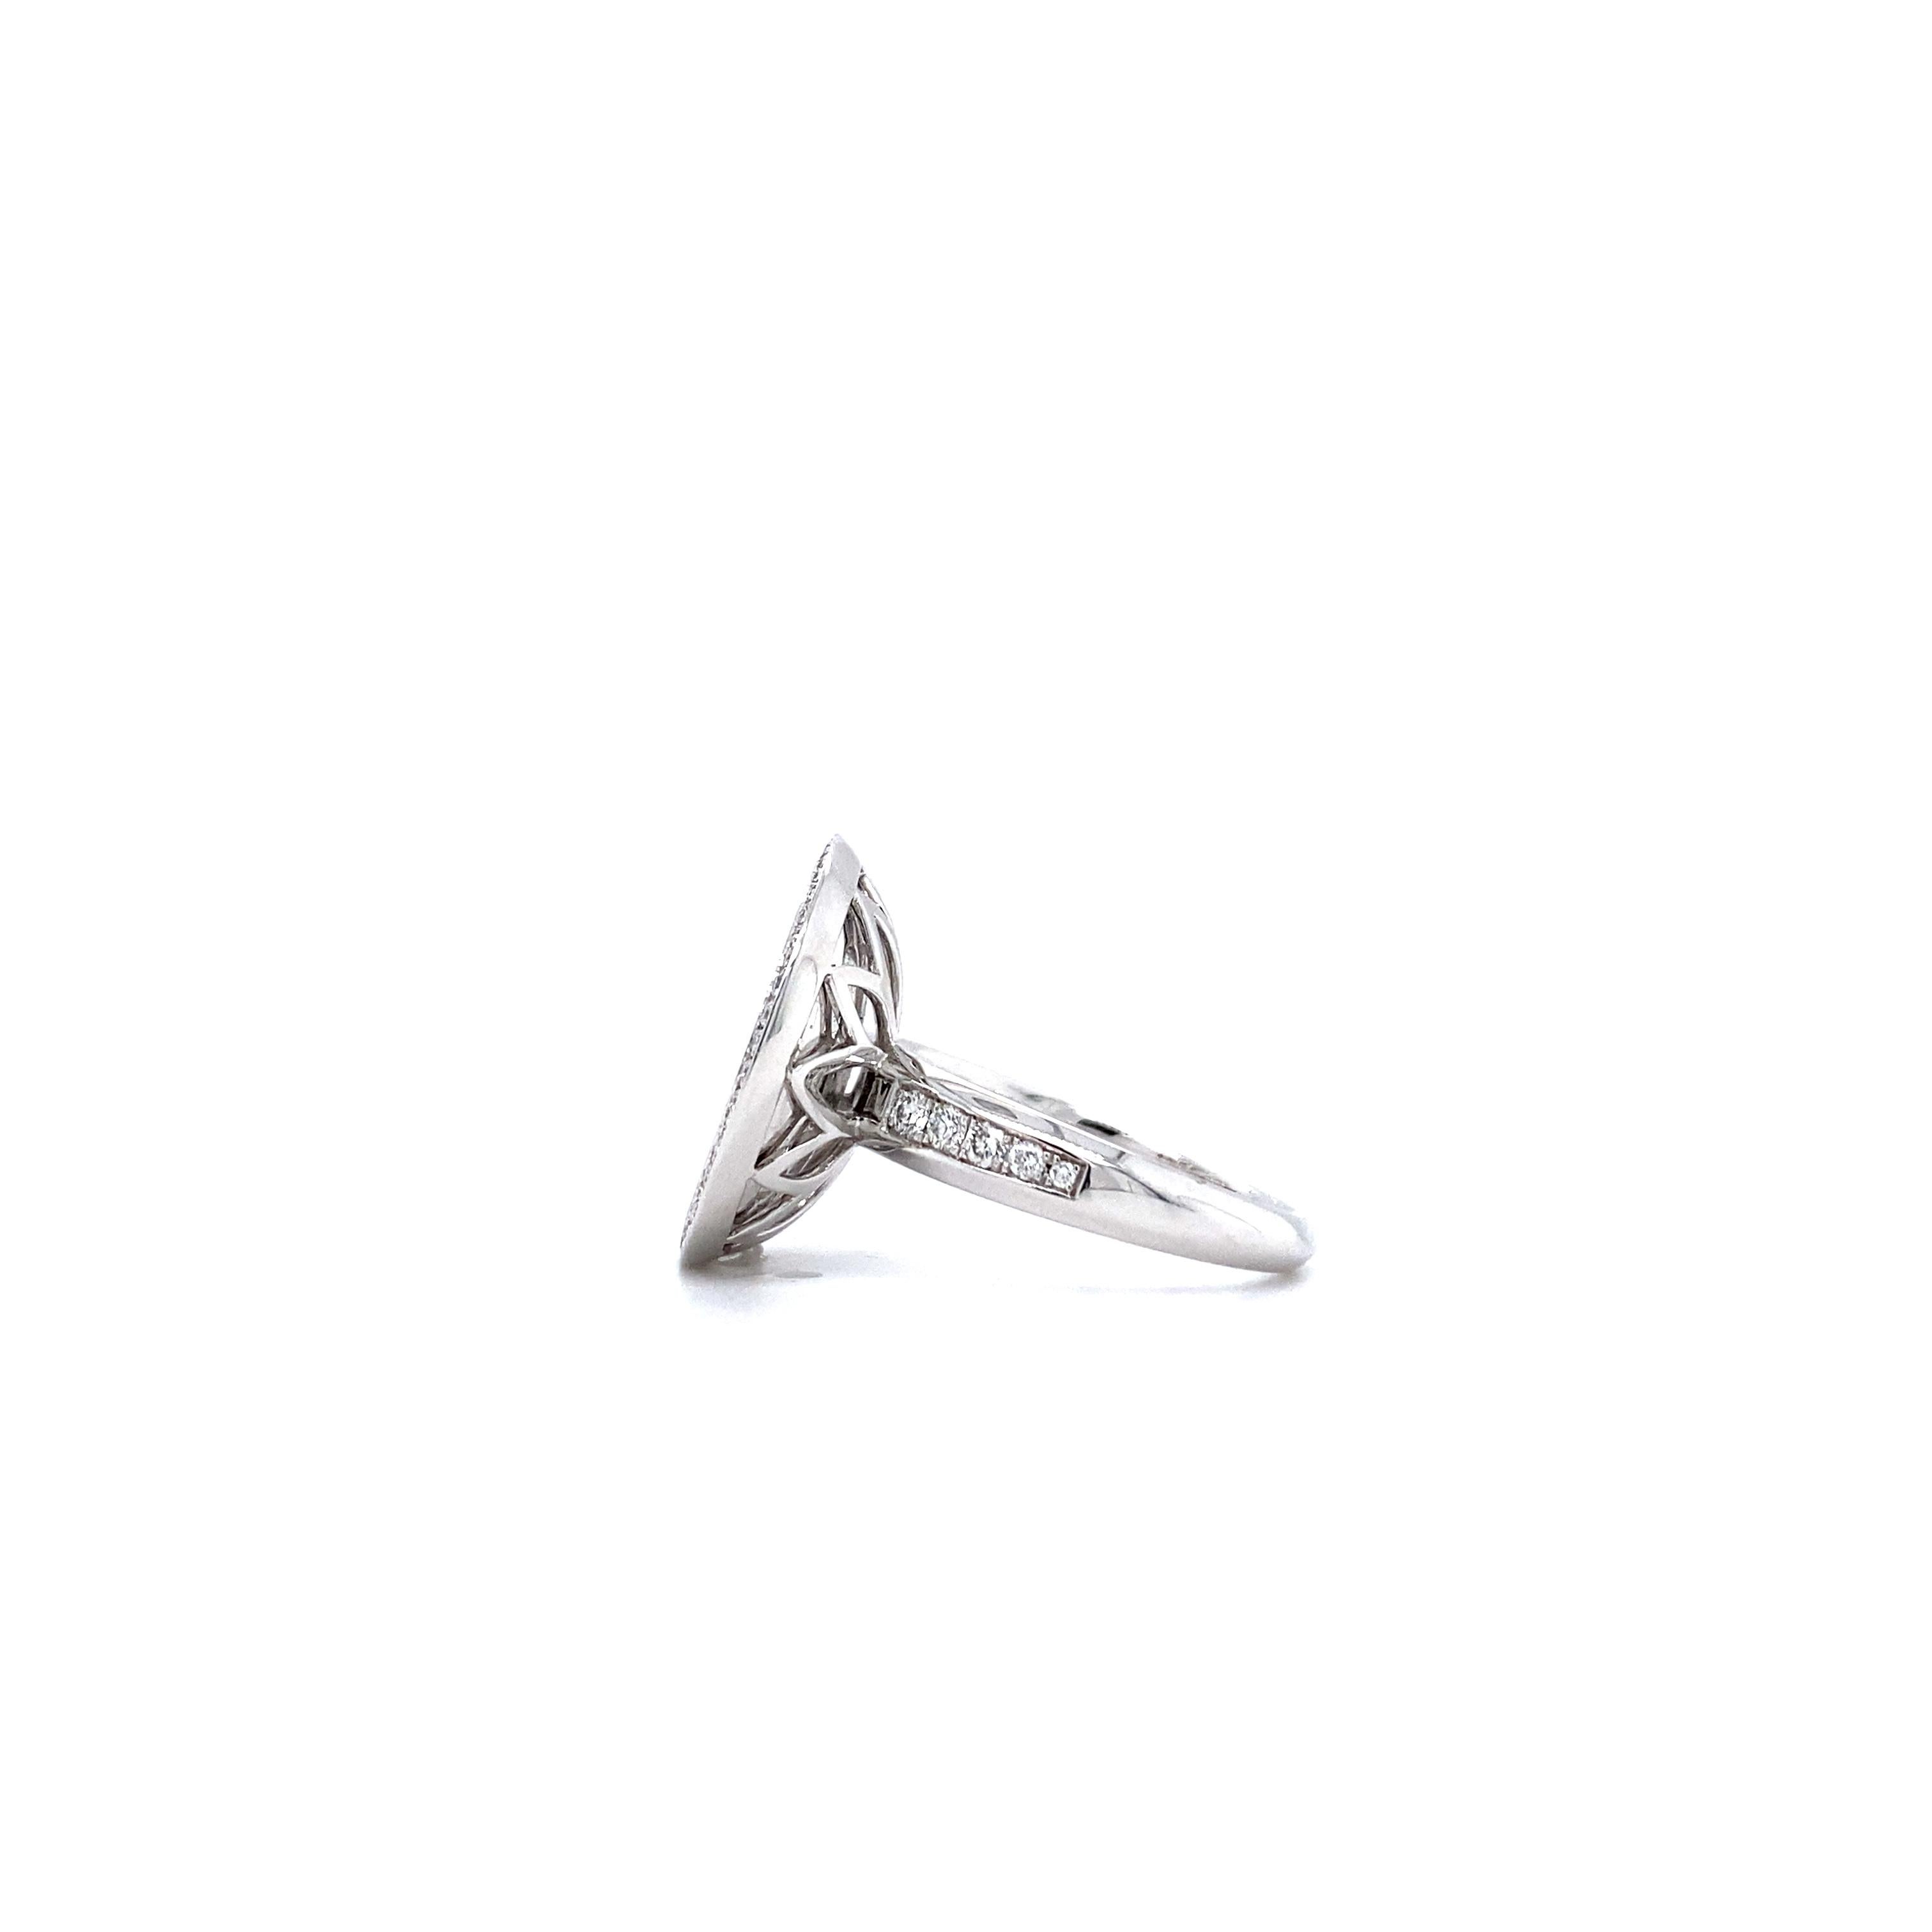 Victor Mayer Trance Ring 18k White Gold with Diamonds For Sale 4